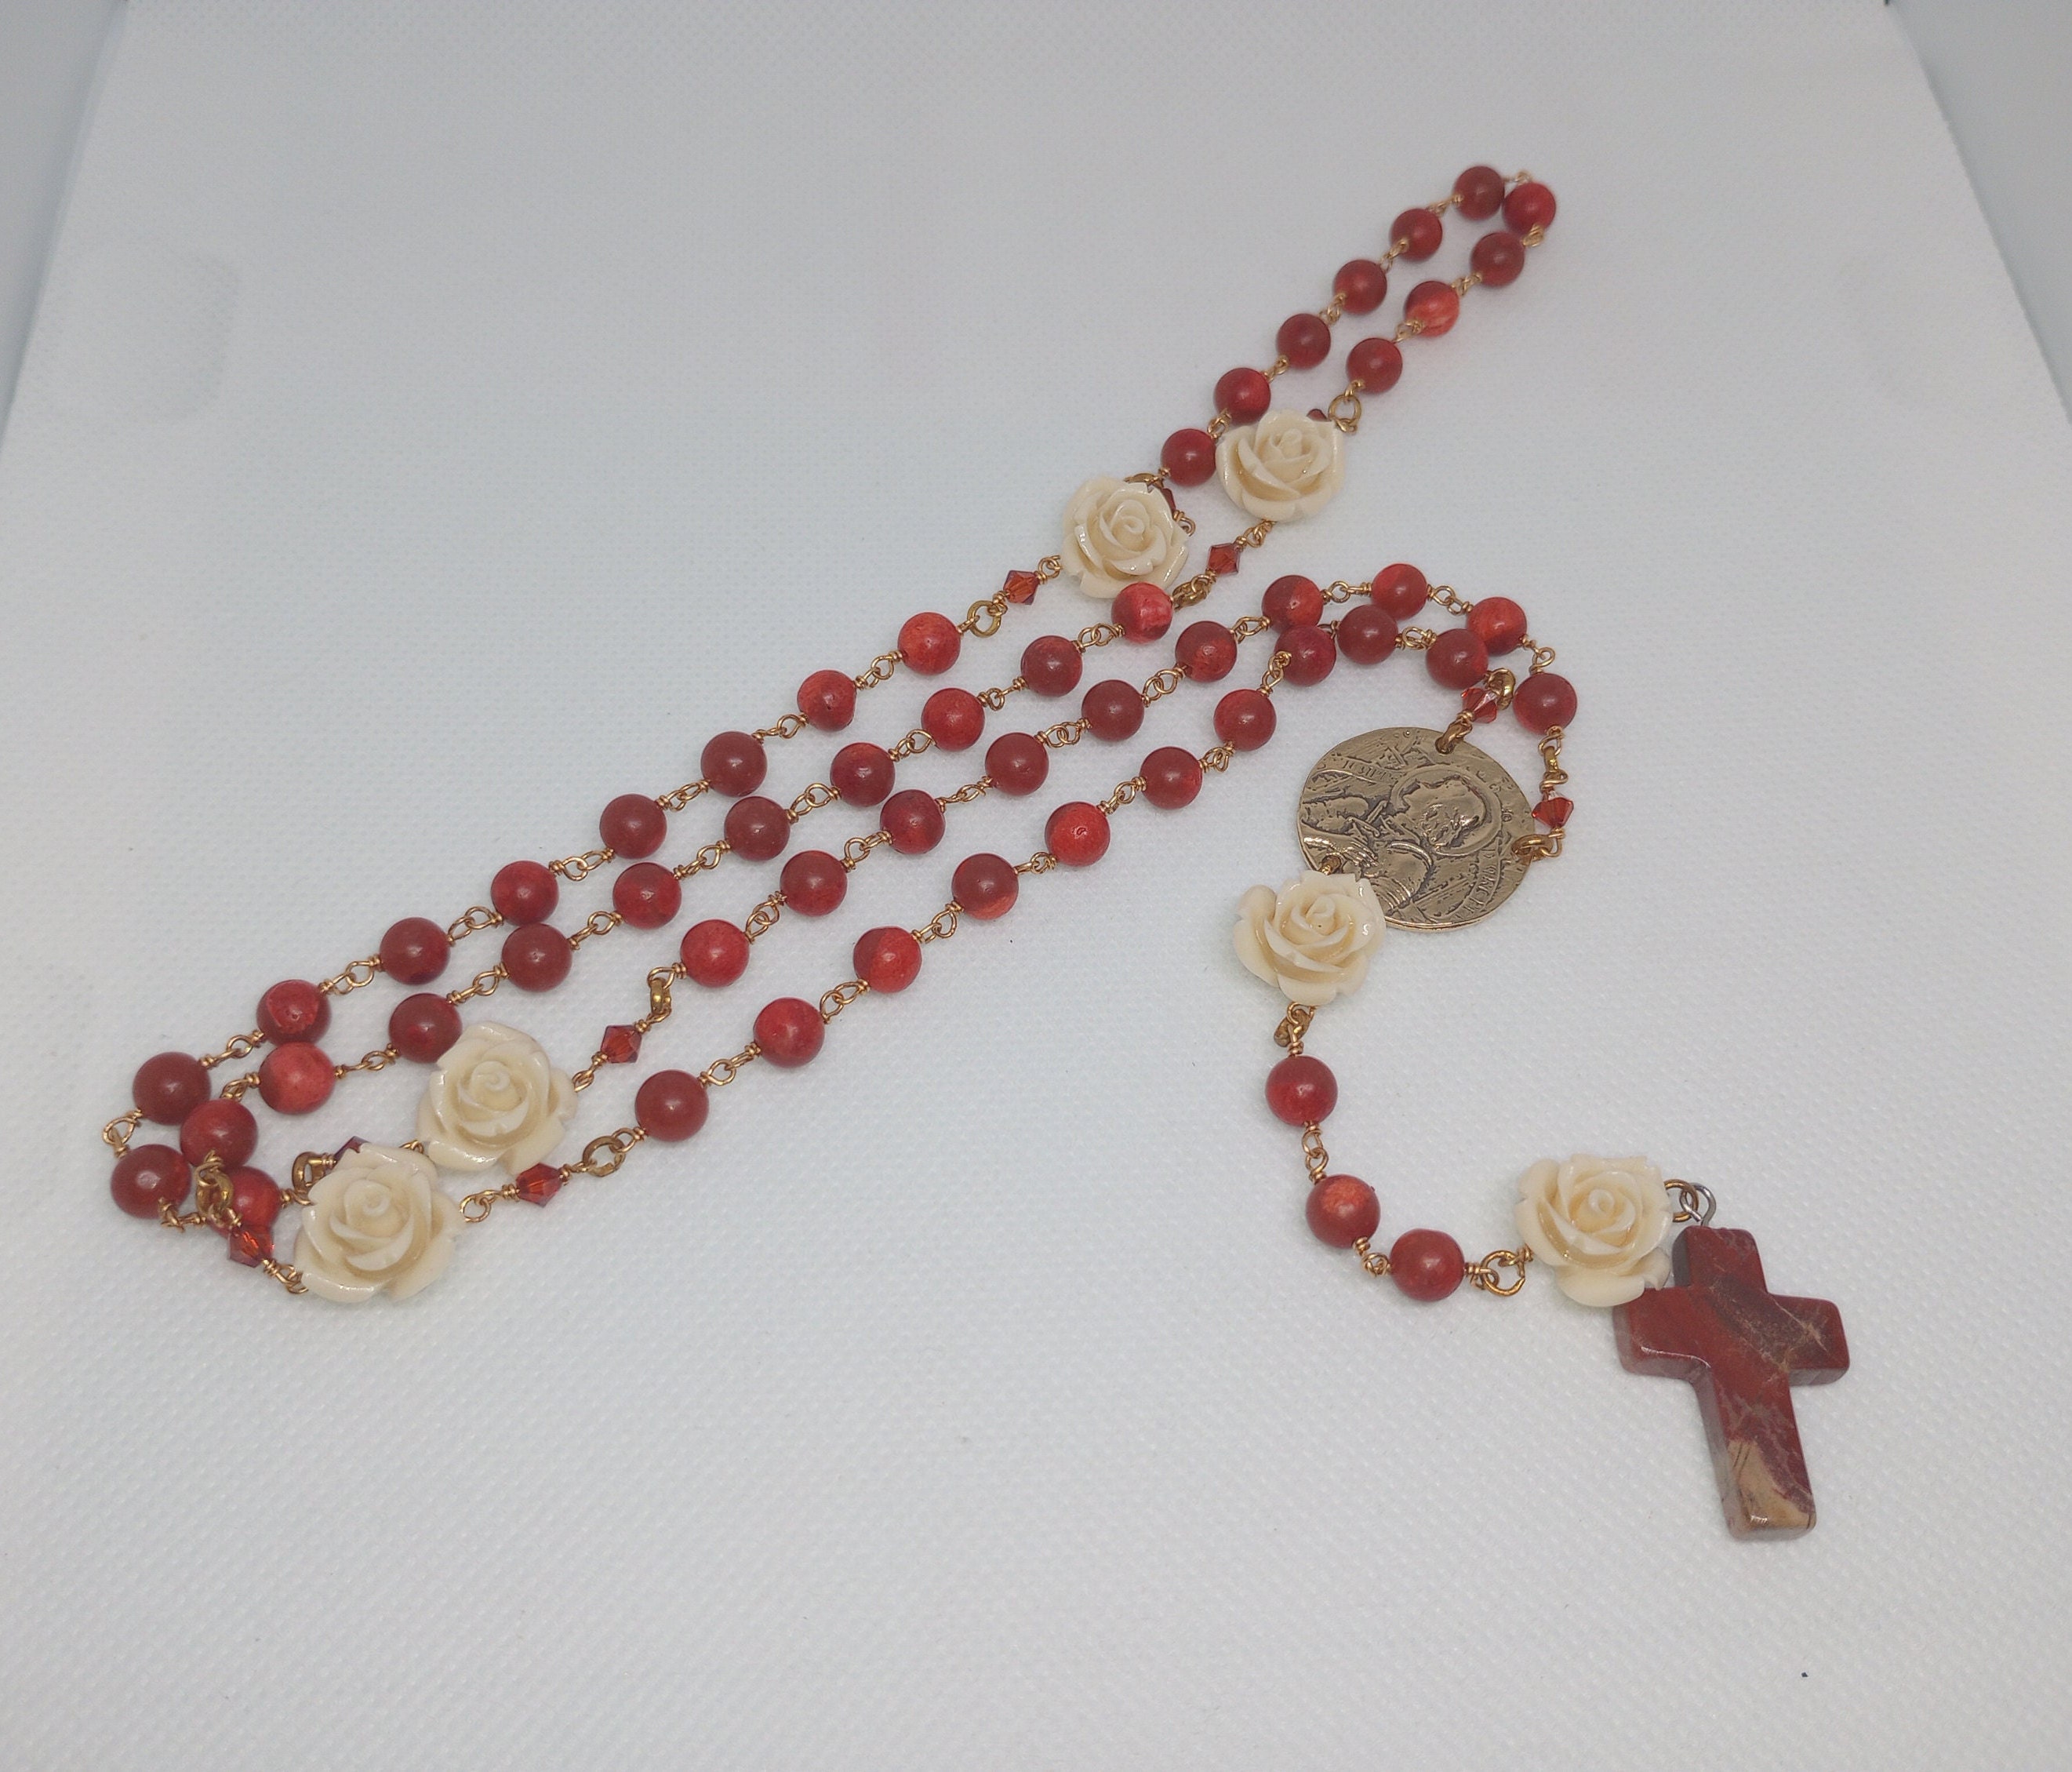 Saint Joan of Arc garnet gemstone rosary beads with Crowning of Thorns –  Unique Rosary Beads